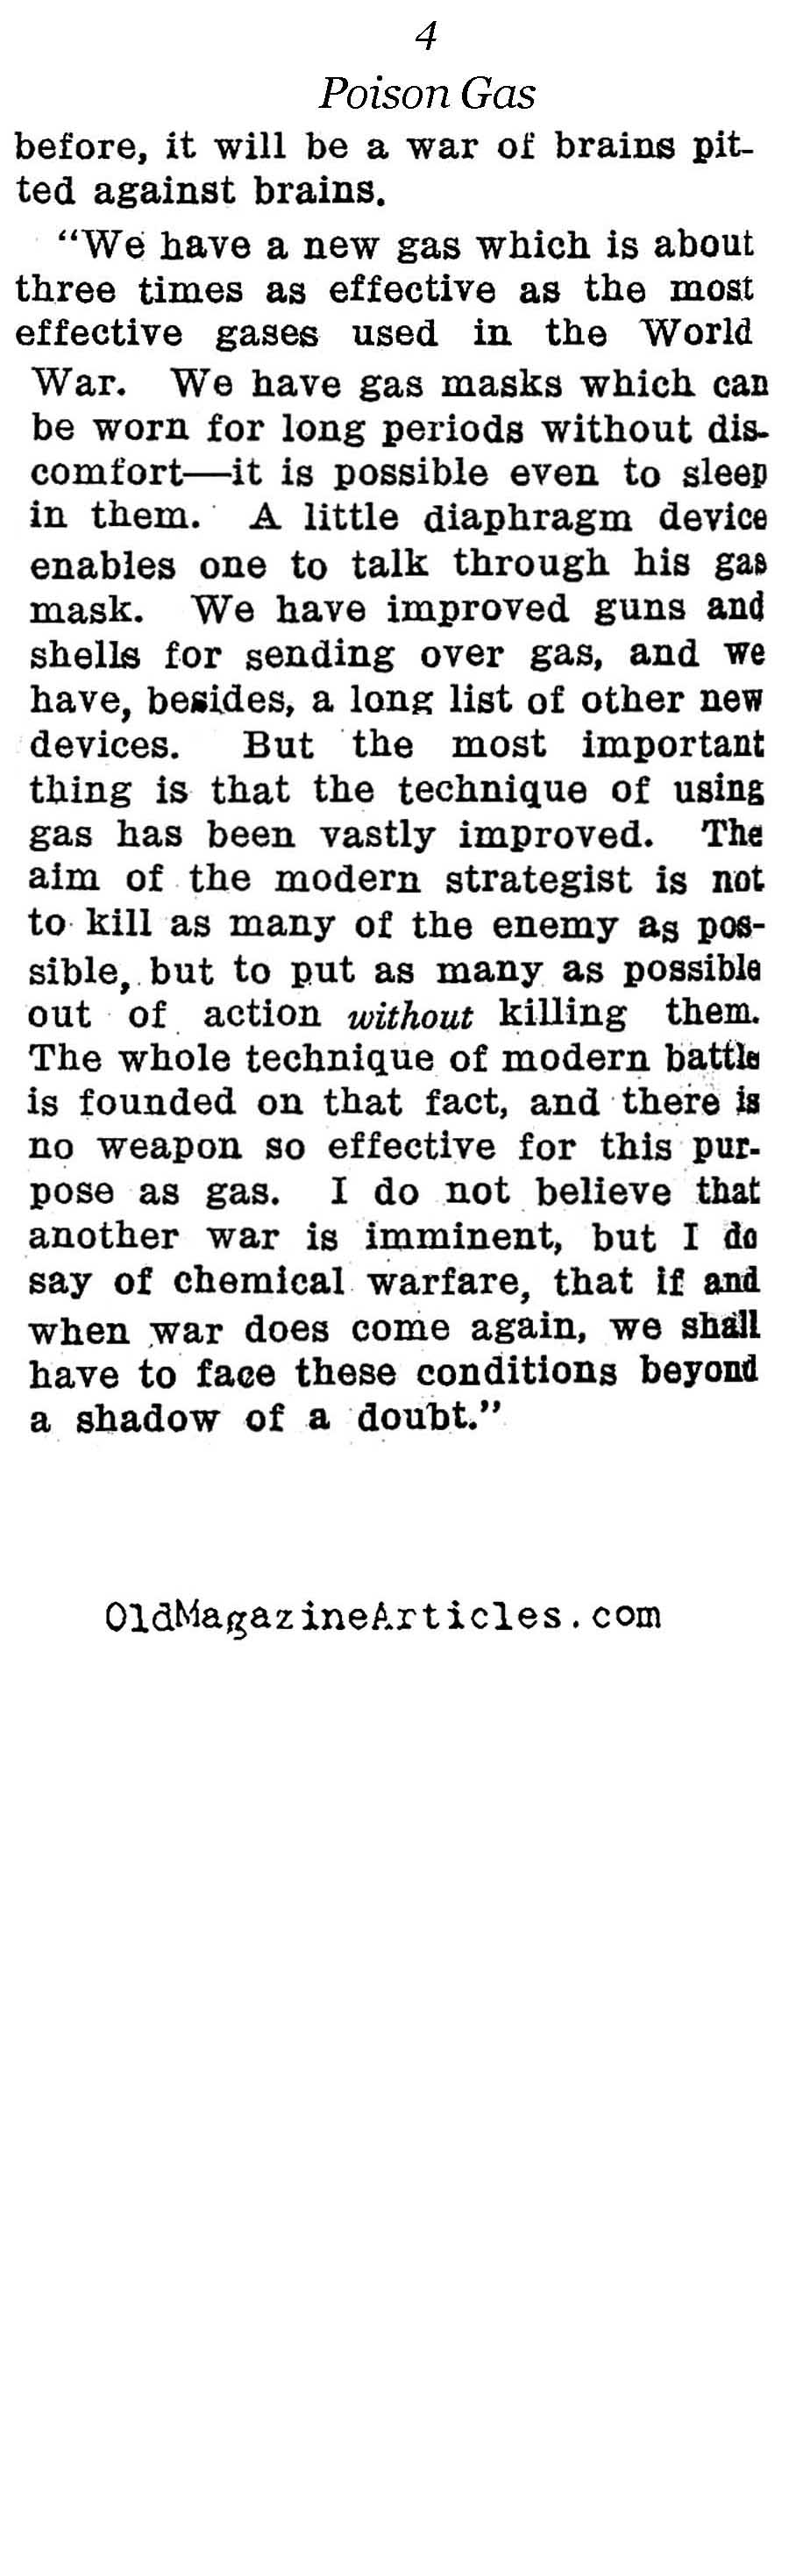 In Defense Of Chemical Warfare (Reader's Digest, 1923)